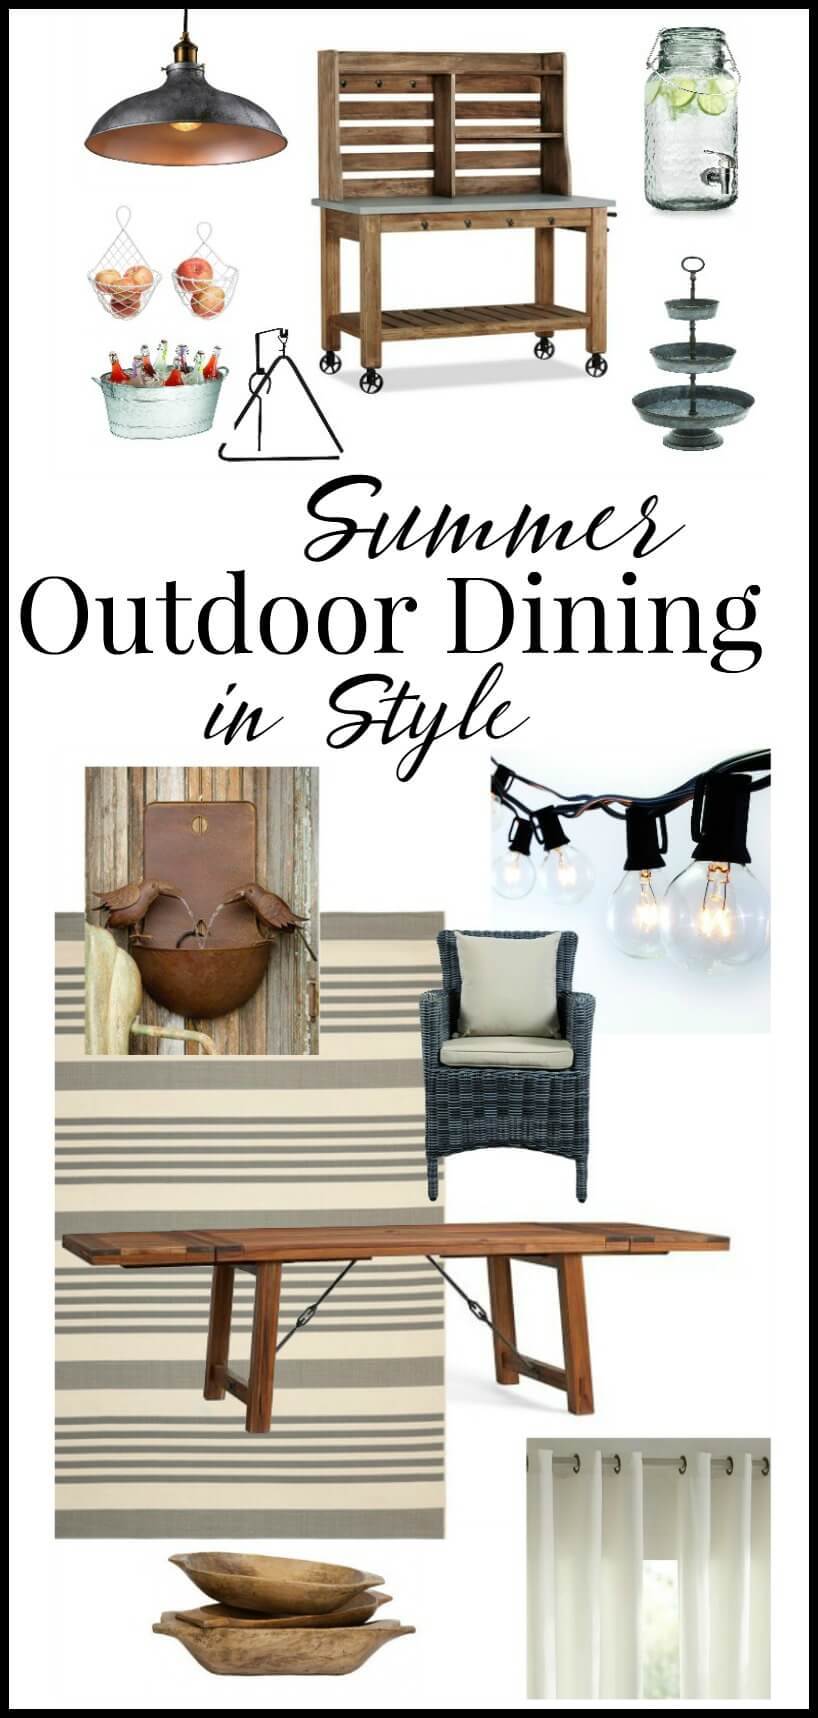 Its time to dress up your backyard! With these outdoor dining space ideas, you are guaranteed a beautiful and stylish space.